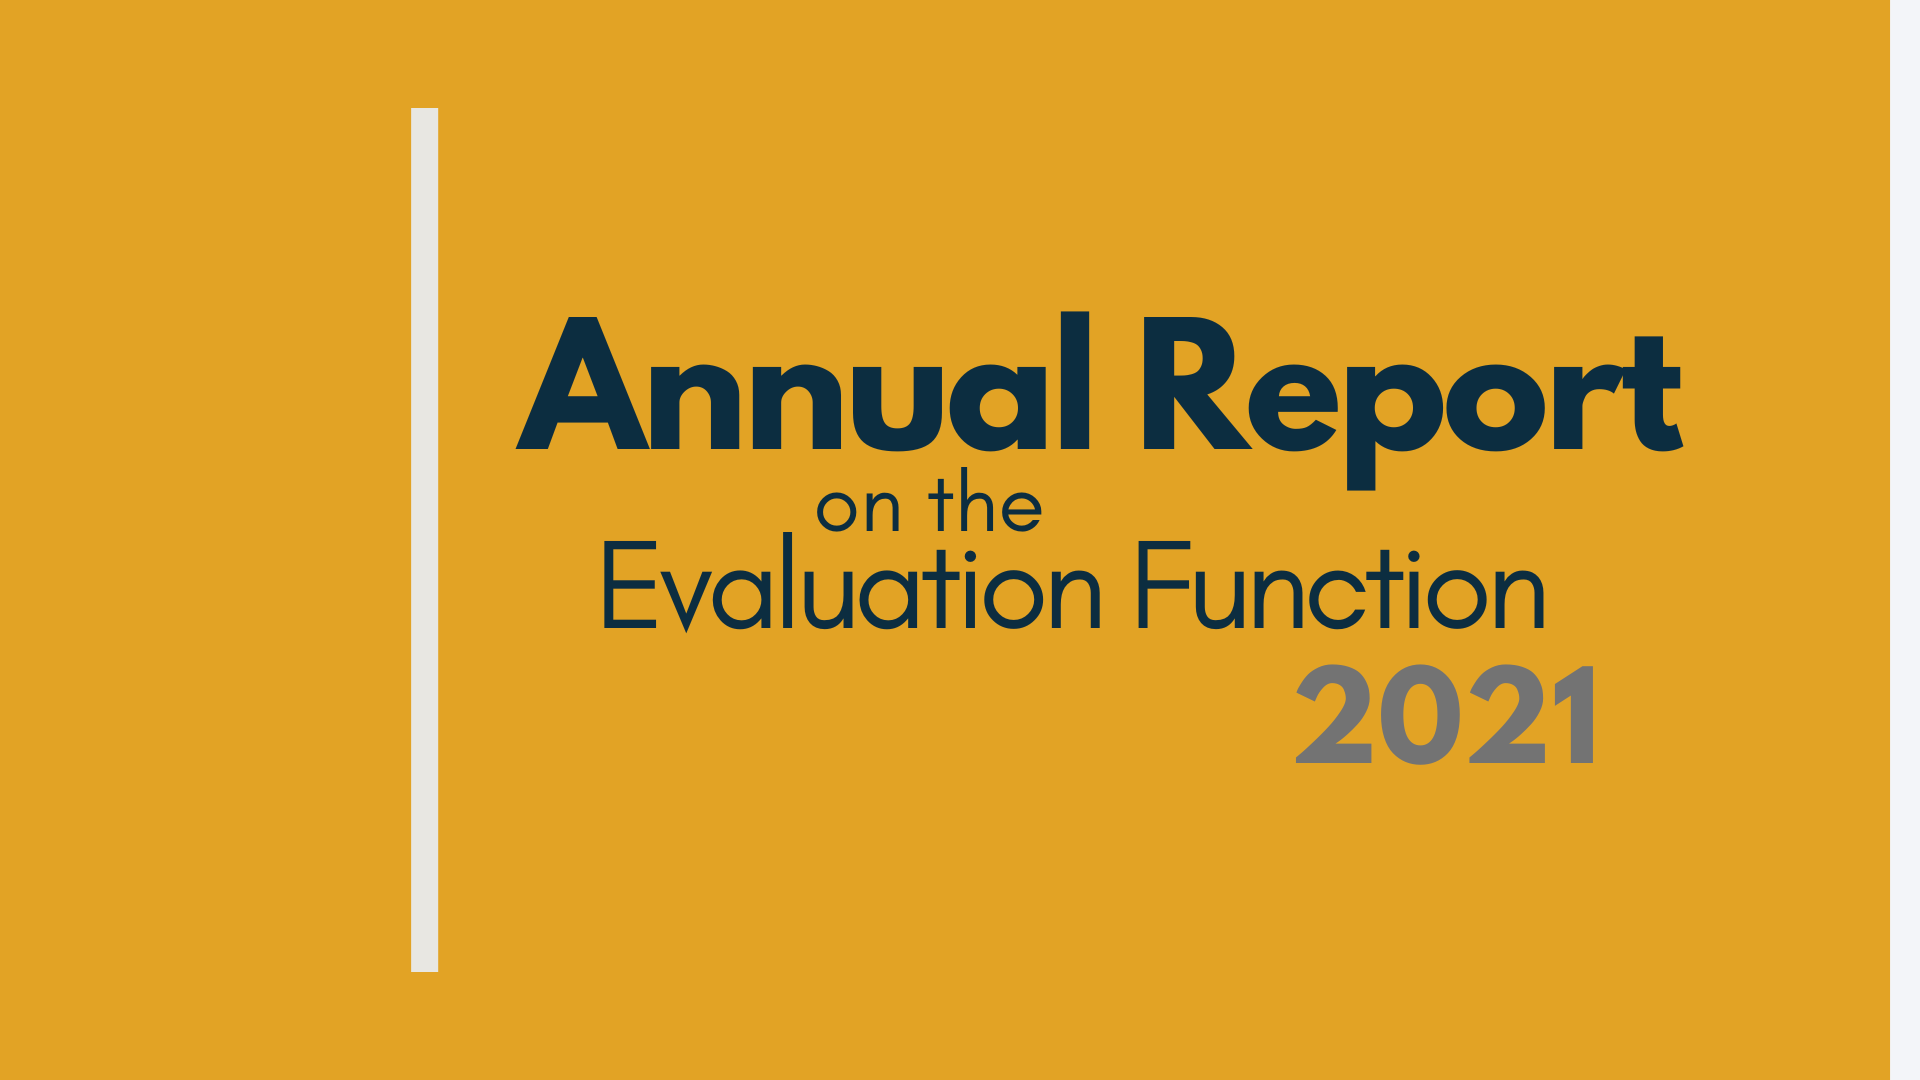 Annual Report on the evaluation function 2021